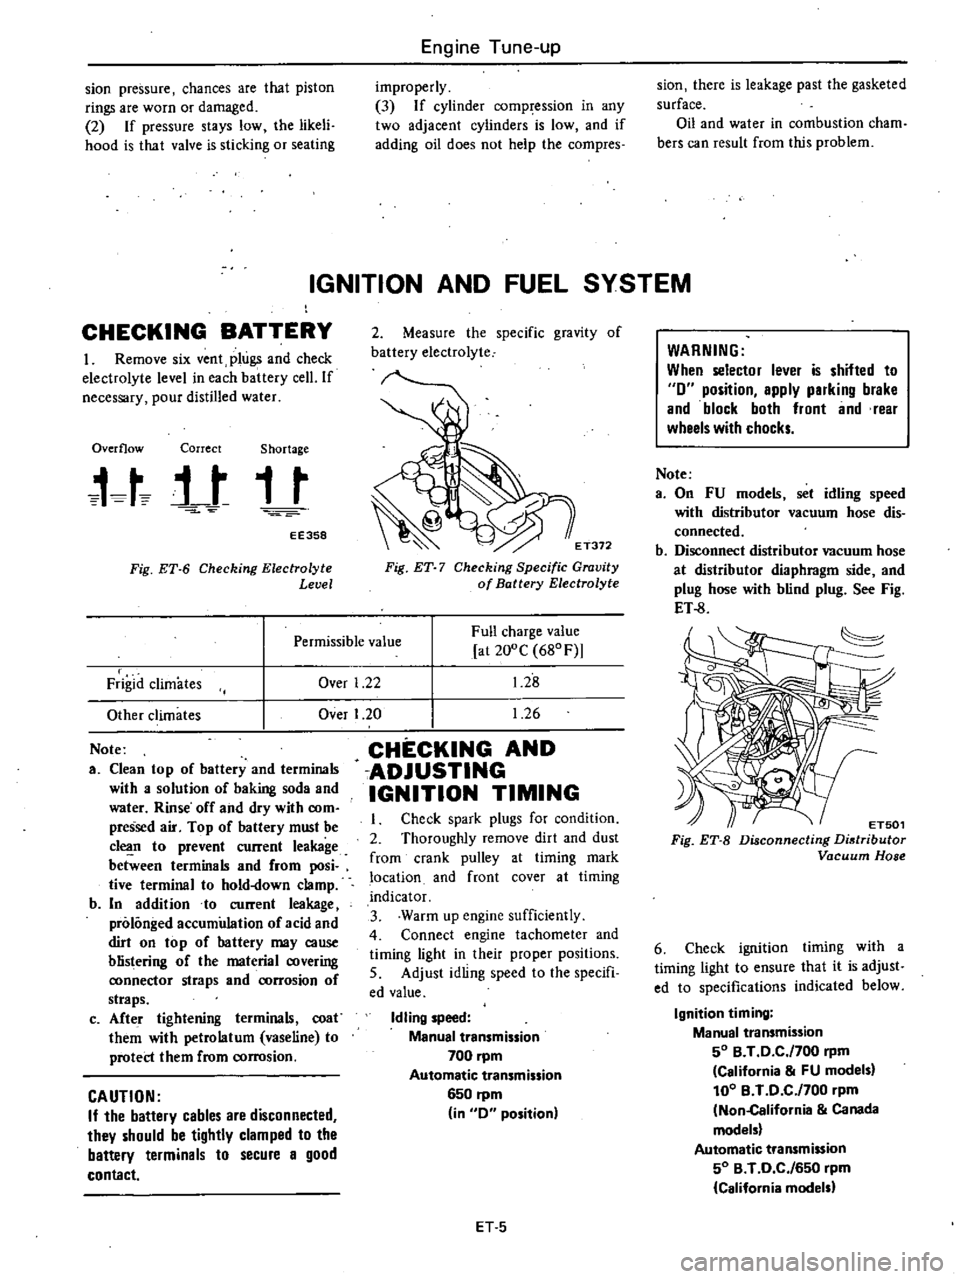 DATSUN 210 1979 User Guide 
sion

pressure 
chances 
are

that

piston

rings 
are

worn 
or 
damaged

2

If

pressure 
stays 
low

the 
likeli

hood 
is 
that 
valve 
is

sticking 
or

seating 
Engine 
Tune

up

improperly

3
